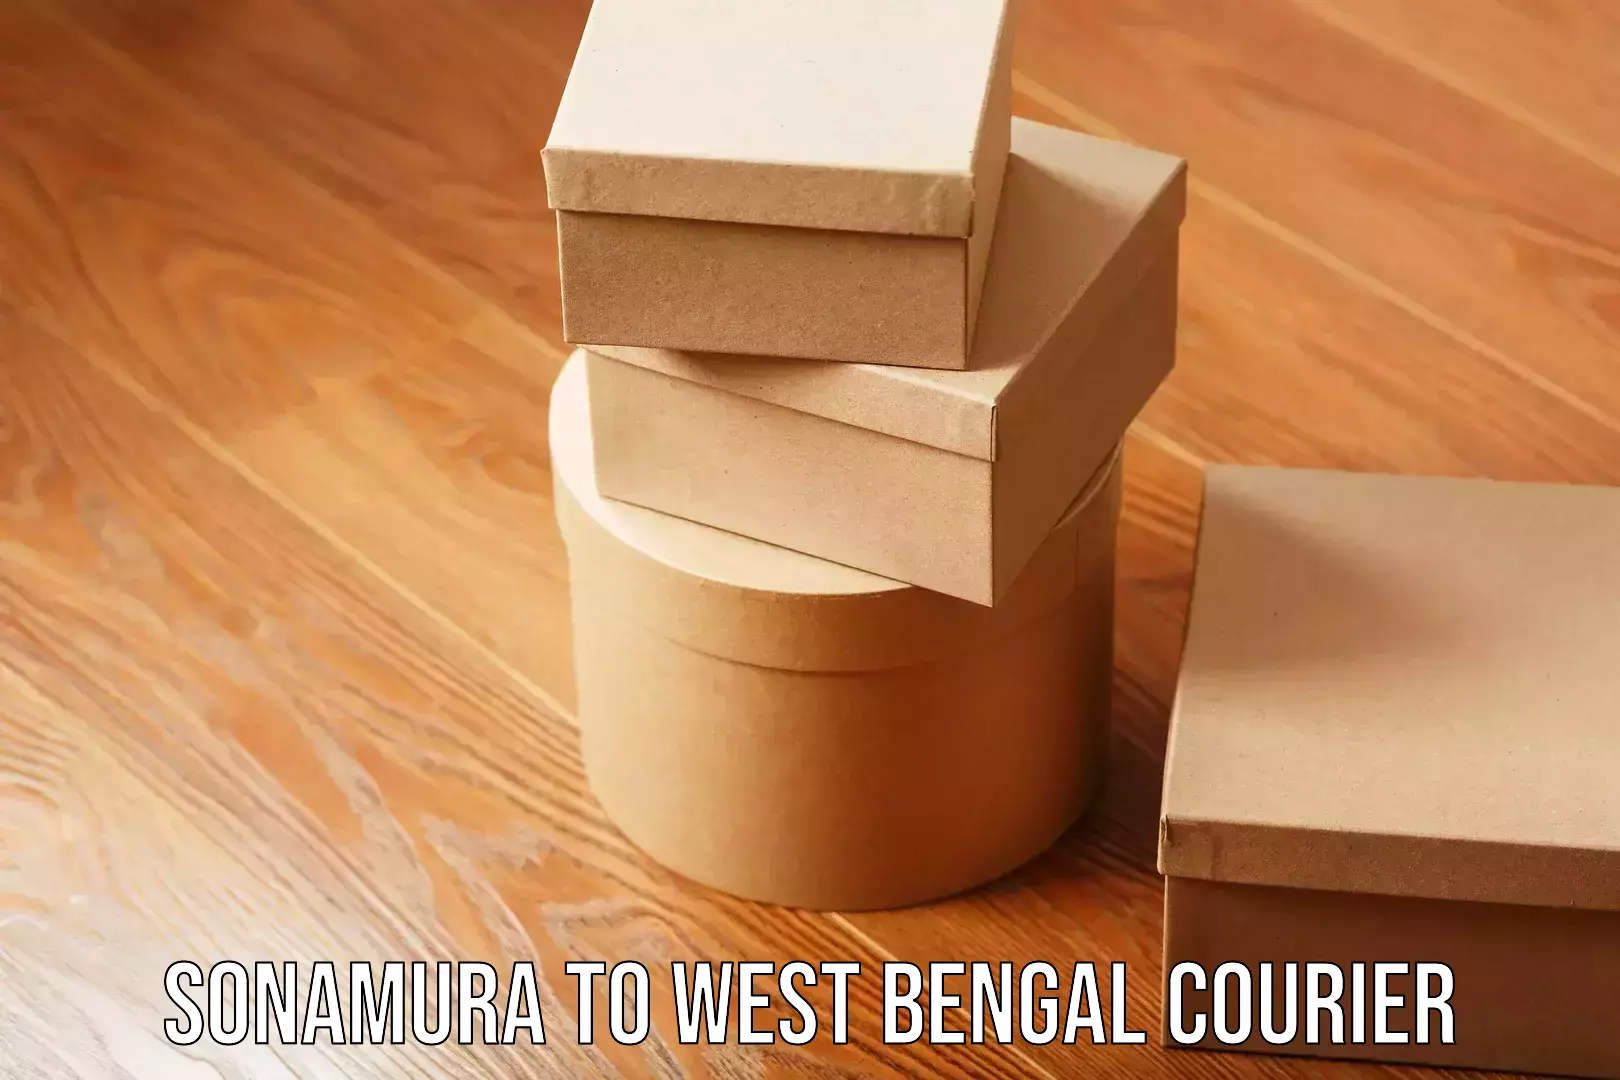 Sustainable courier practices Sonamura to West Bengal